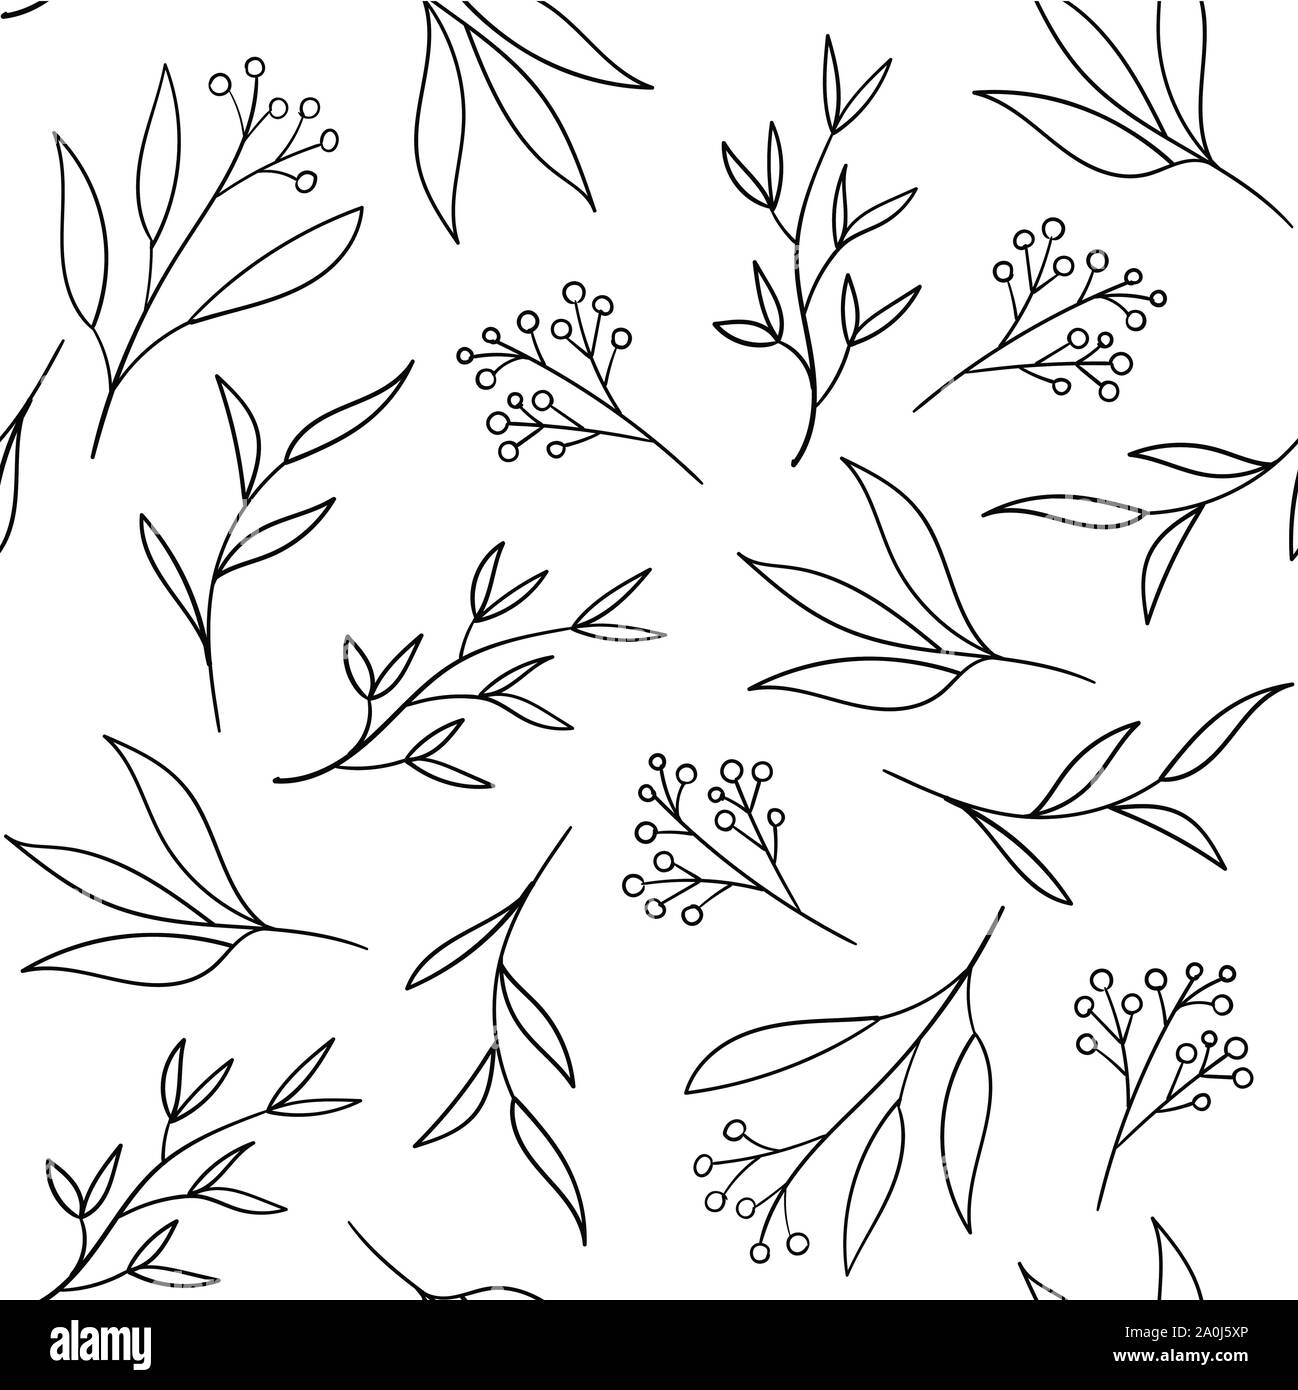 Floral seamless pattern with hand drawn herbs Stock Vector